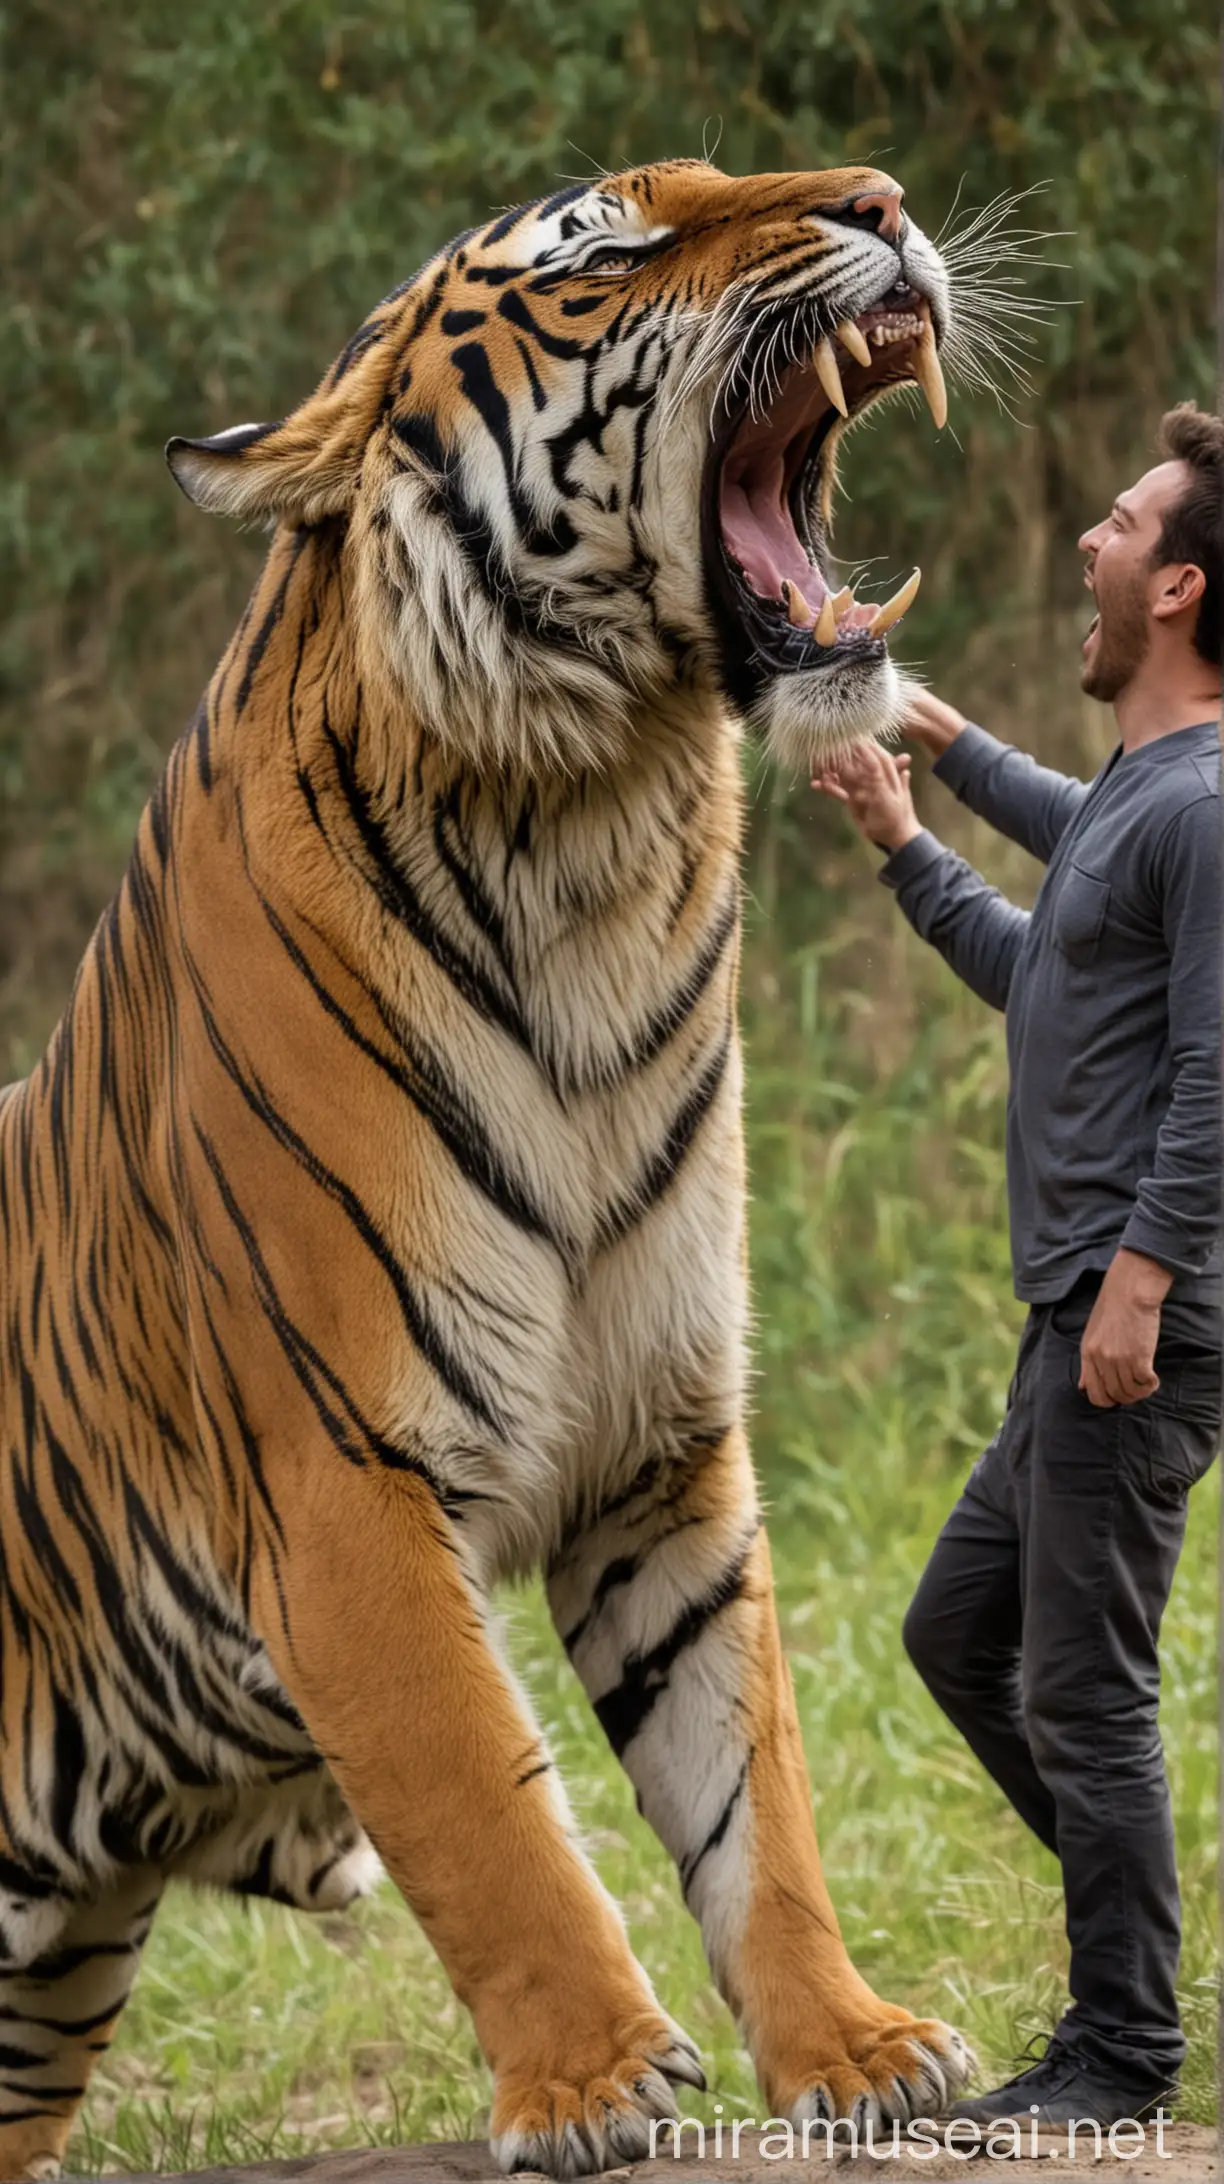 Powerful Tiger Roaring with a Fearless Man